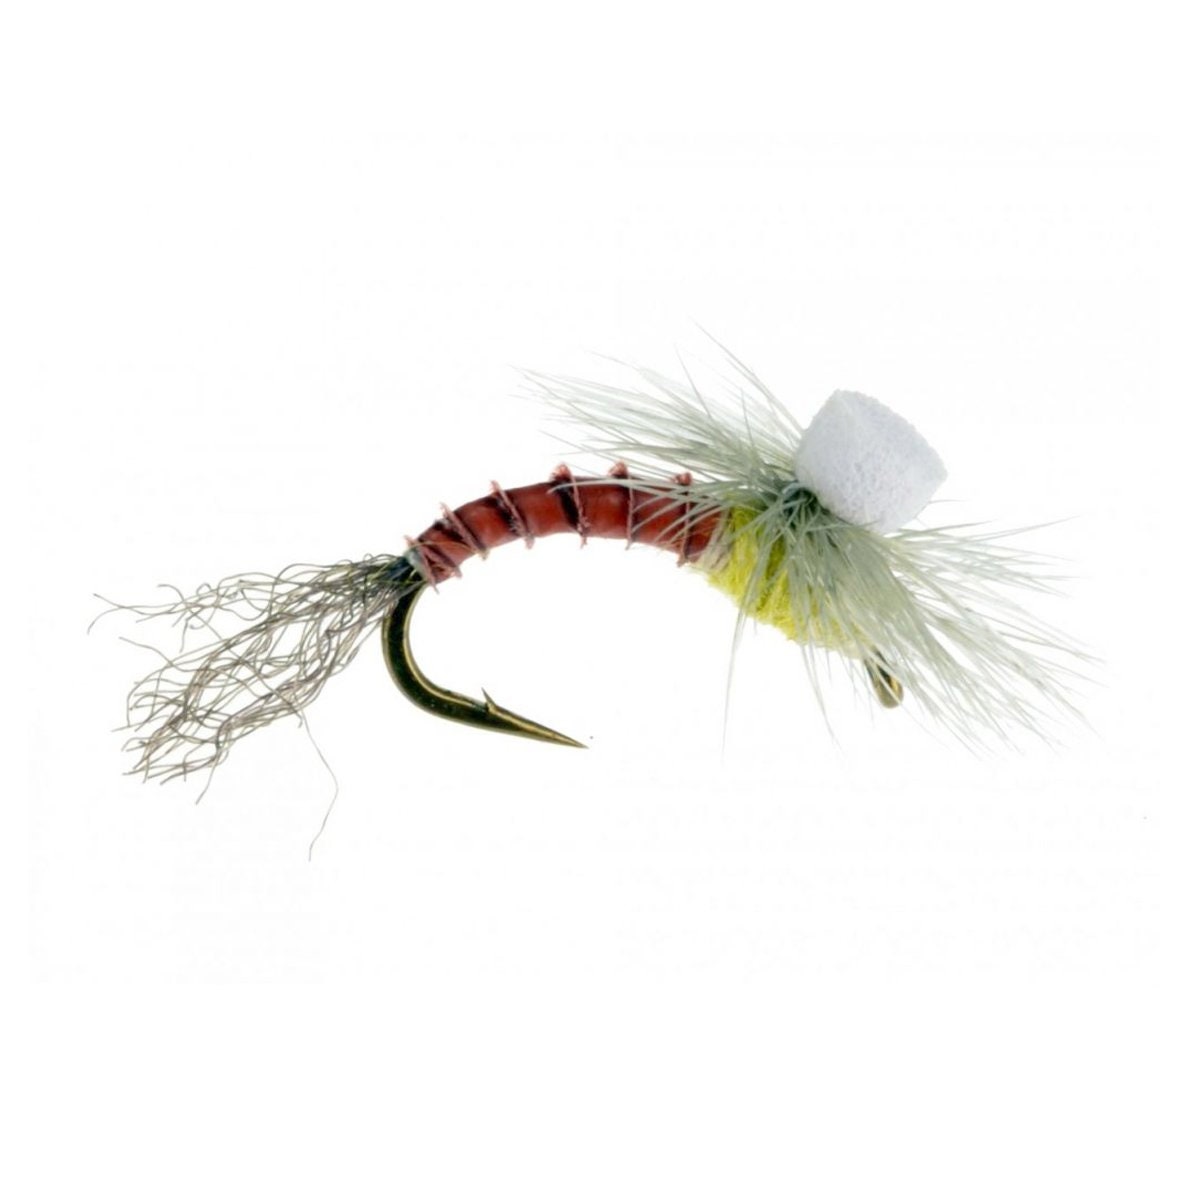 PMD Emerger Fly Pattern Fly Fishing Flies Dry Flies Klinkhammers and Pale  Morning Dun Fly Patterns 3 Pack of Premium Trout Flies -  Canada